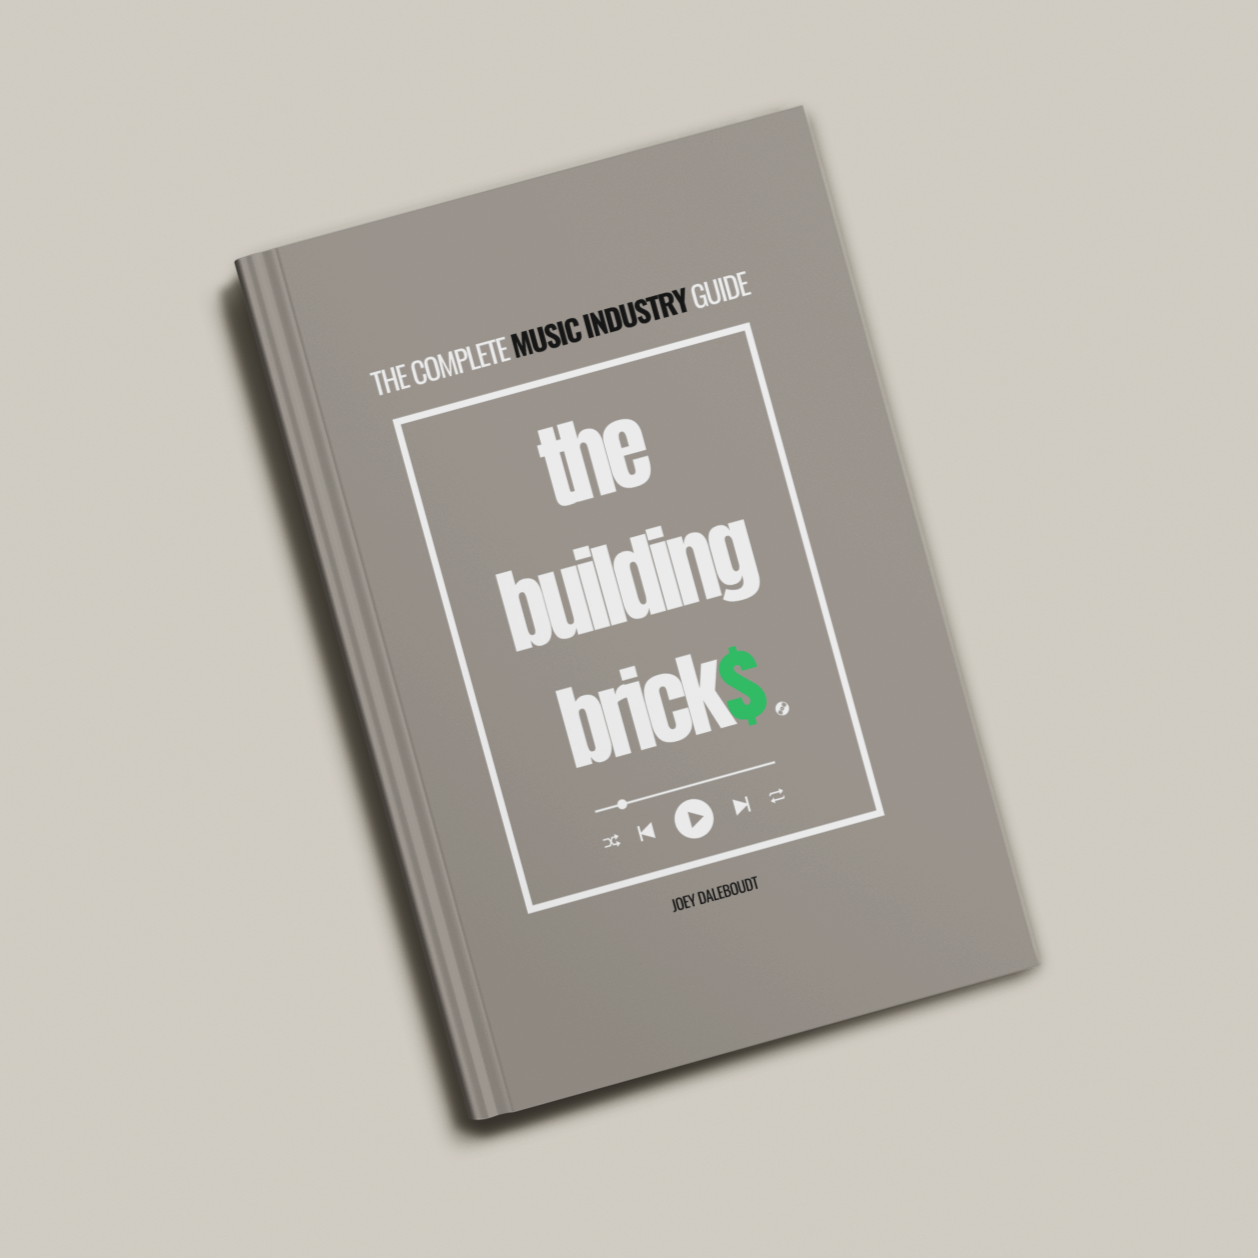 Hardcover - The Complete Music Industry Guide: The Building Bricks